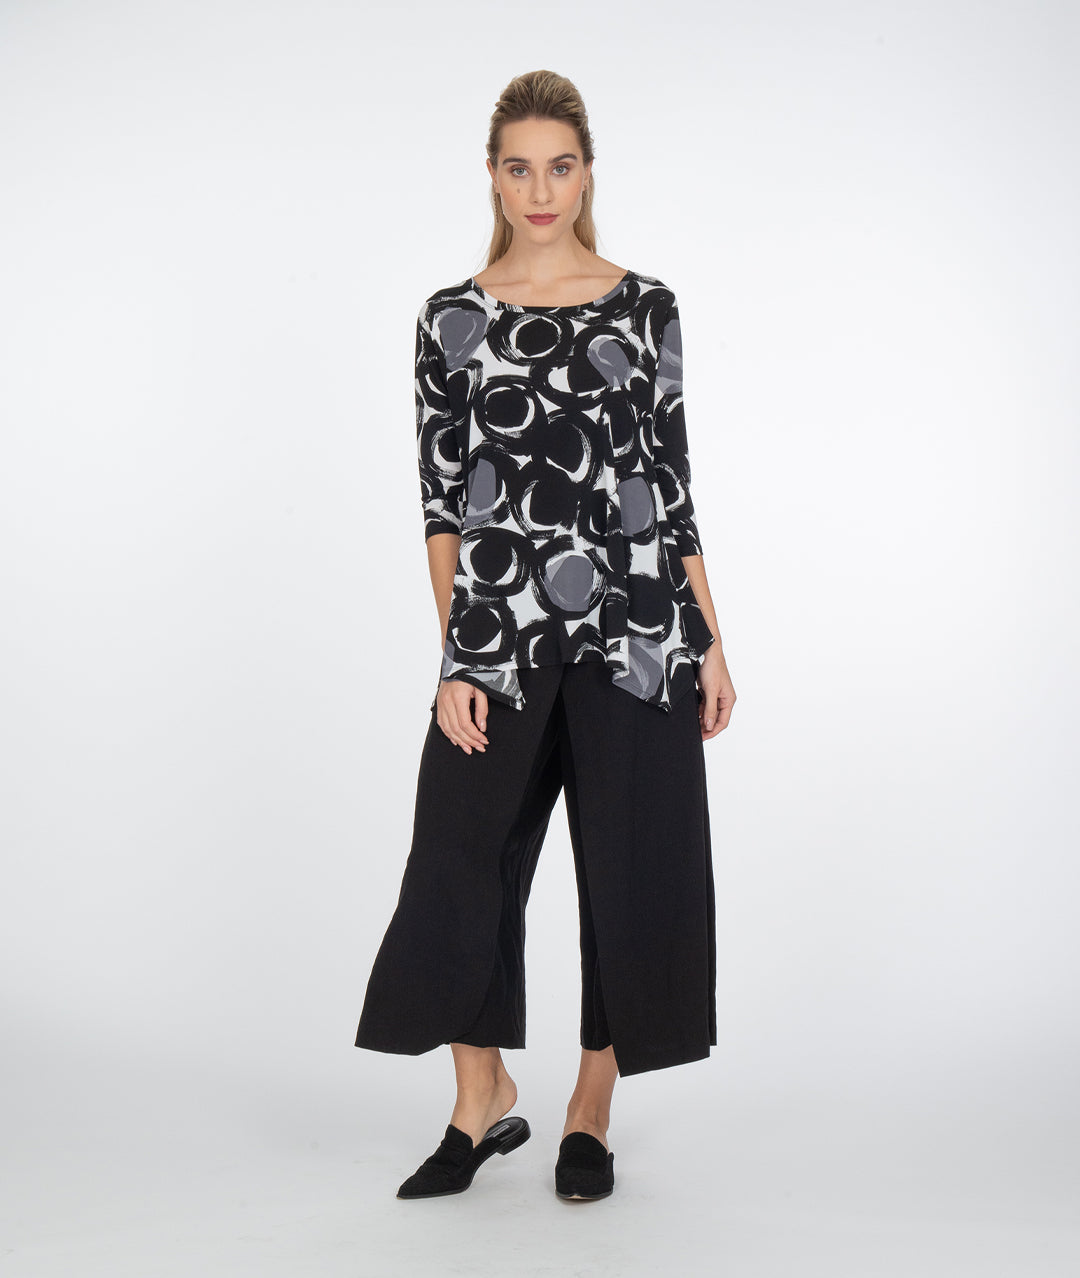 model in a wide leg black pant, with a black, white and grey circle print top with a hankerchief hem